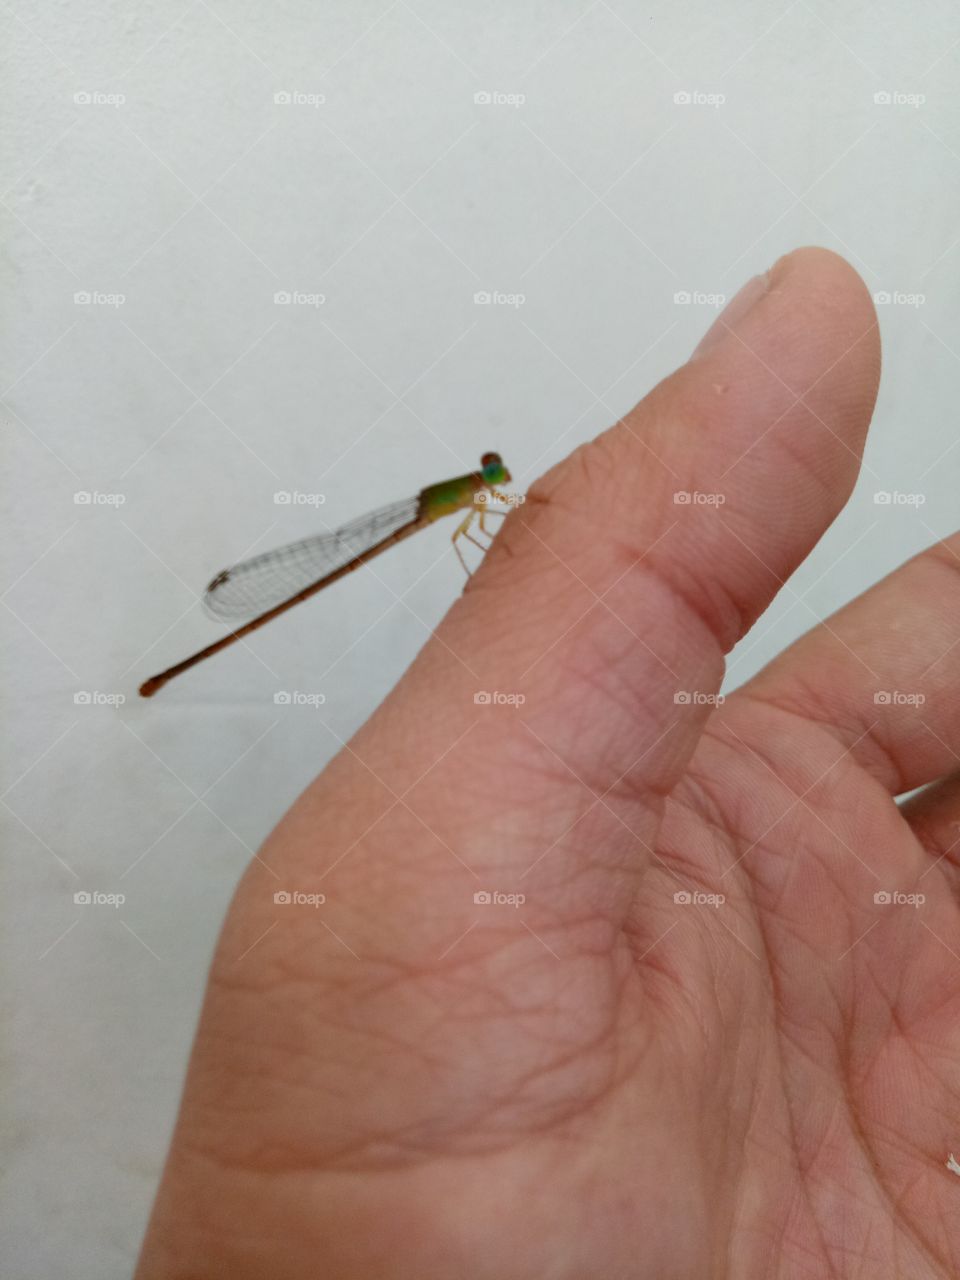 A Small Dragonfly